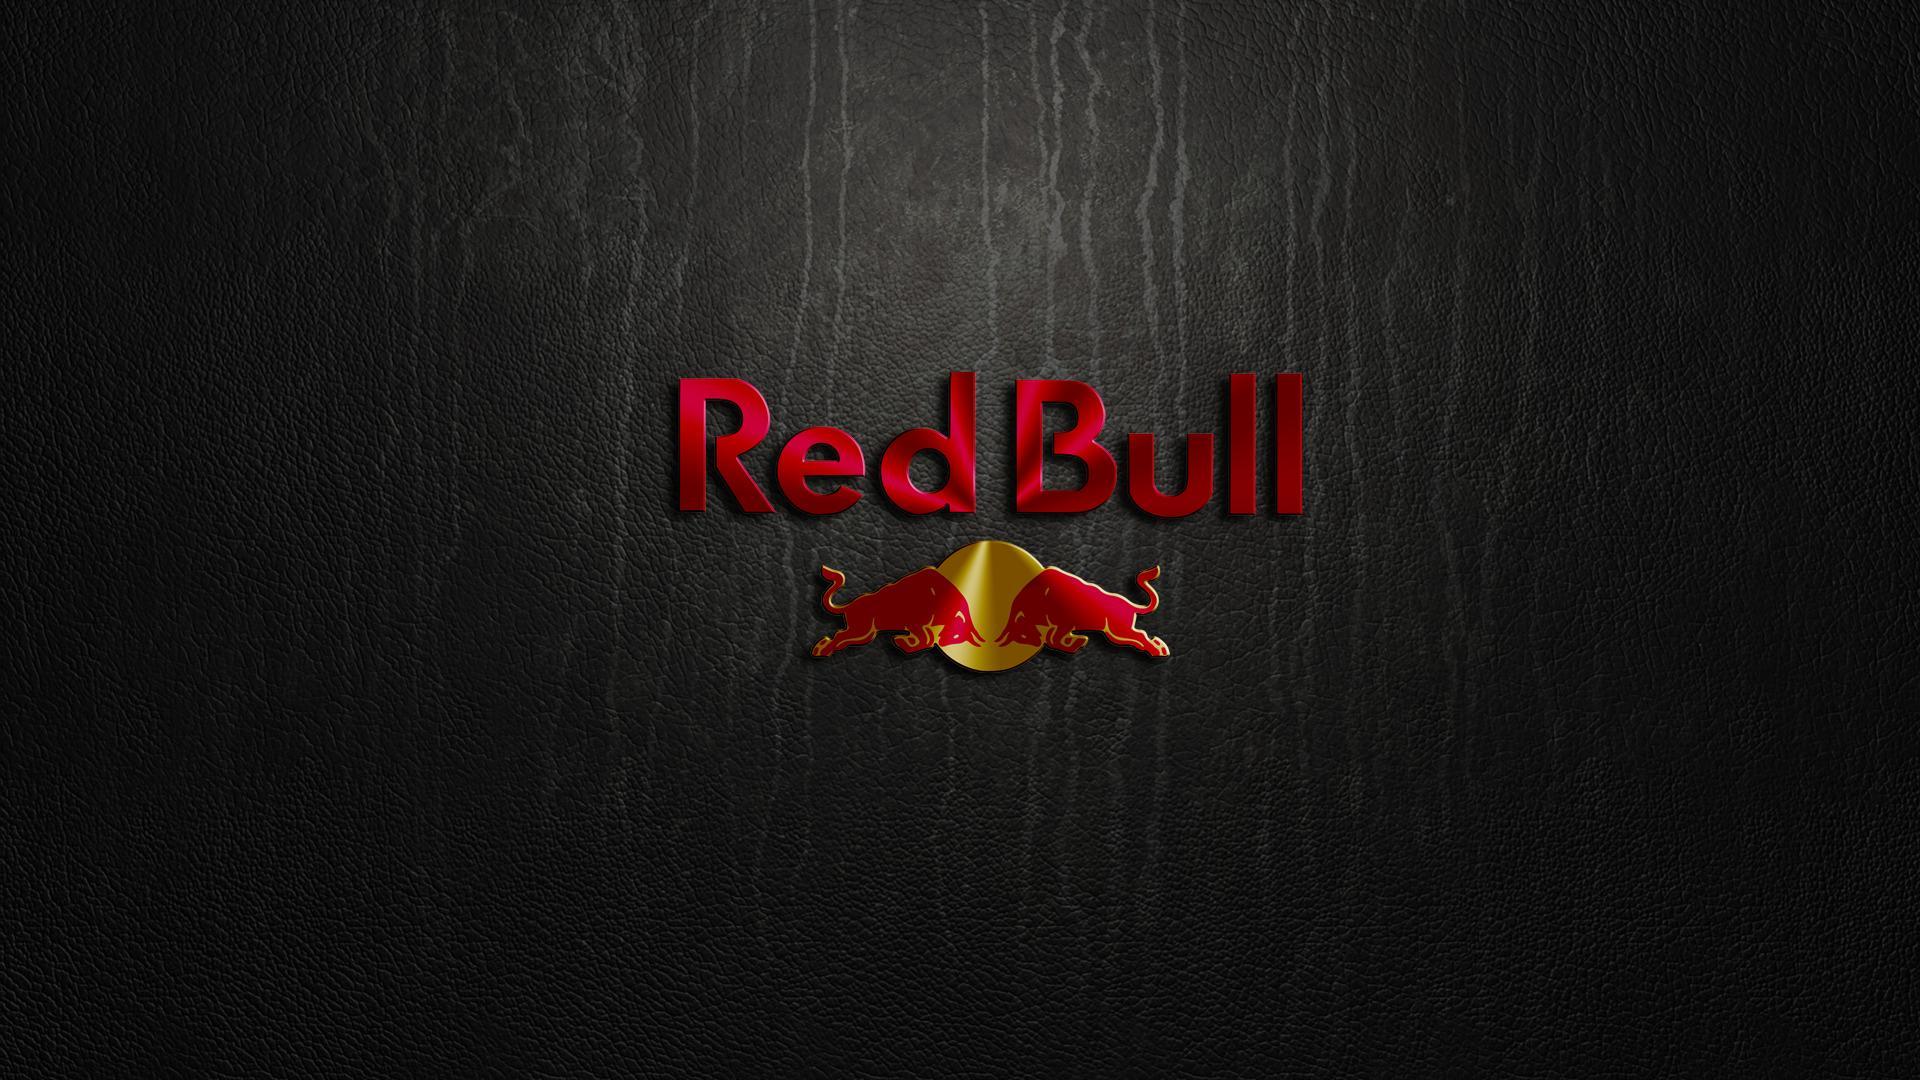 Cool Black and Red Logo - Free Download Red Bull Logo Wallpapers | wallpaper.wiki